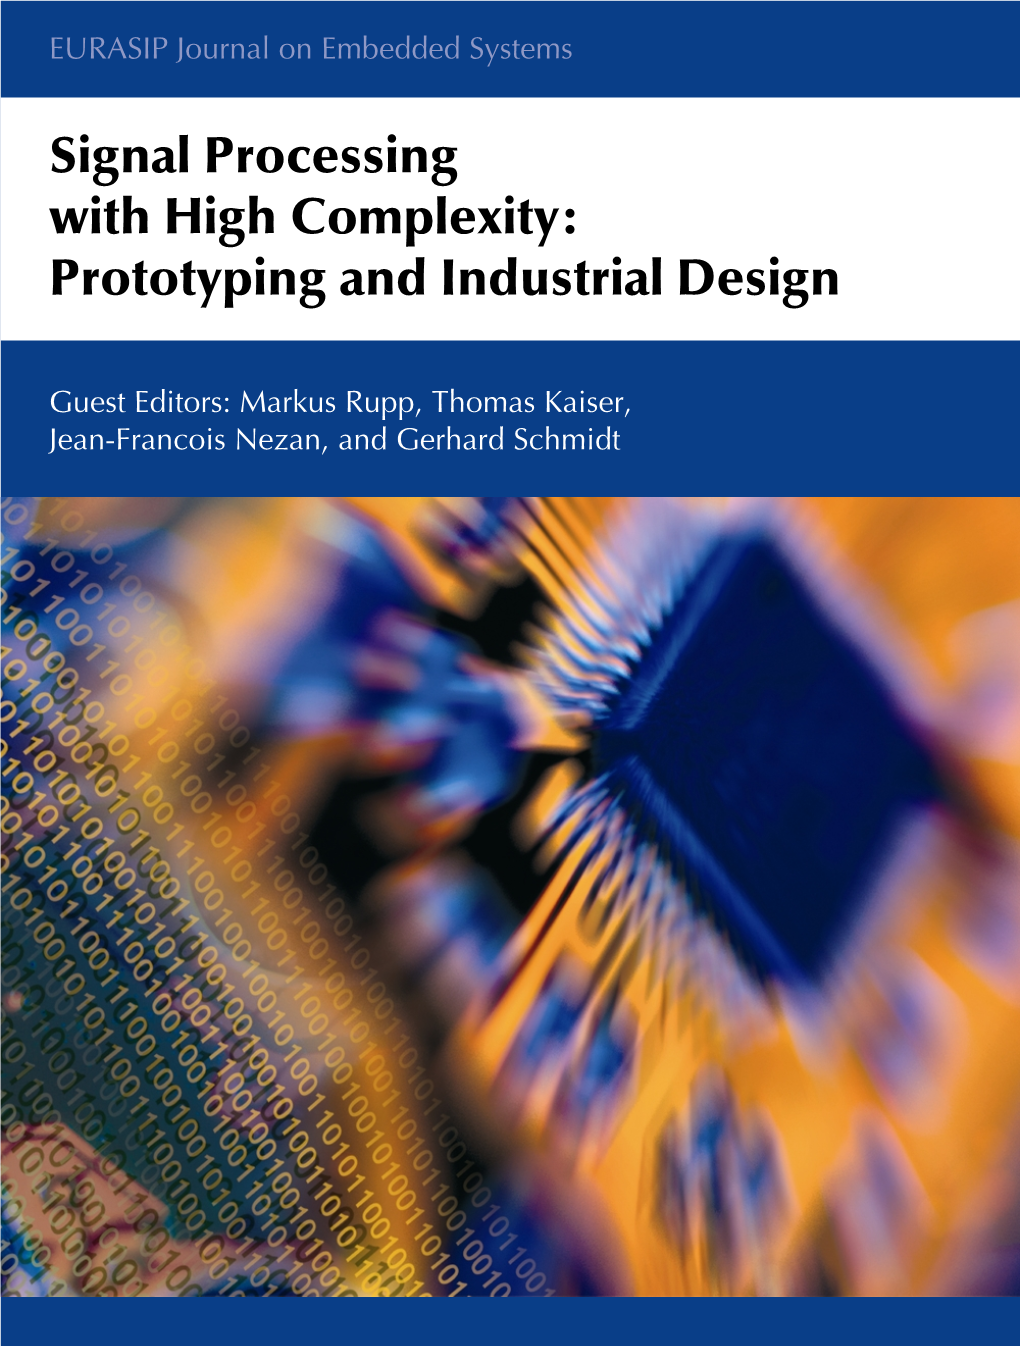 Signal Processing with High Complexity: Prototyping and Industrial Design